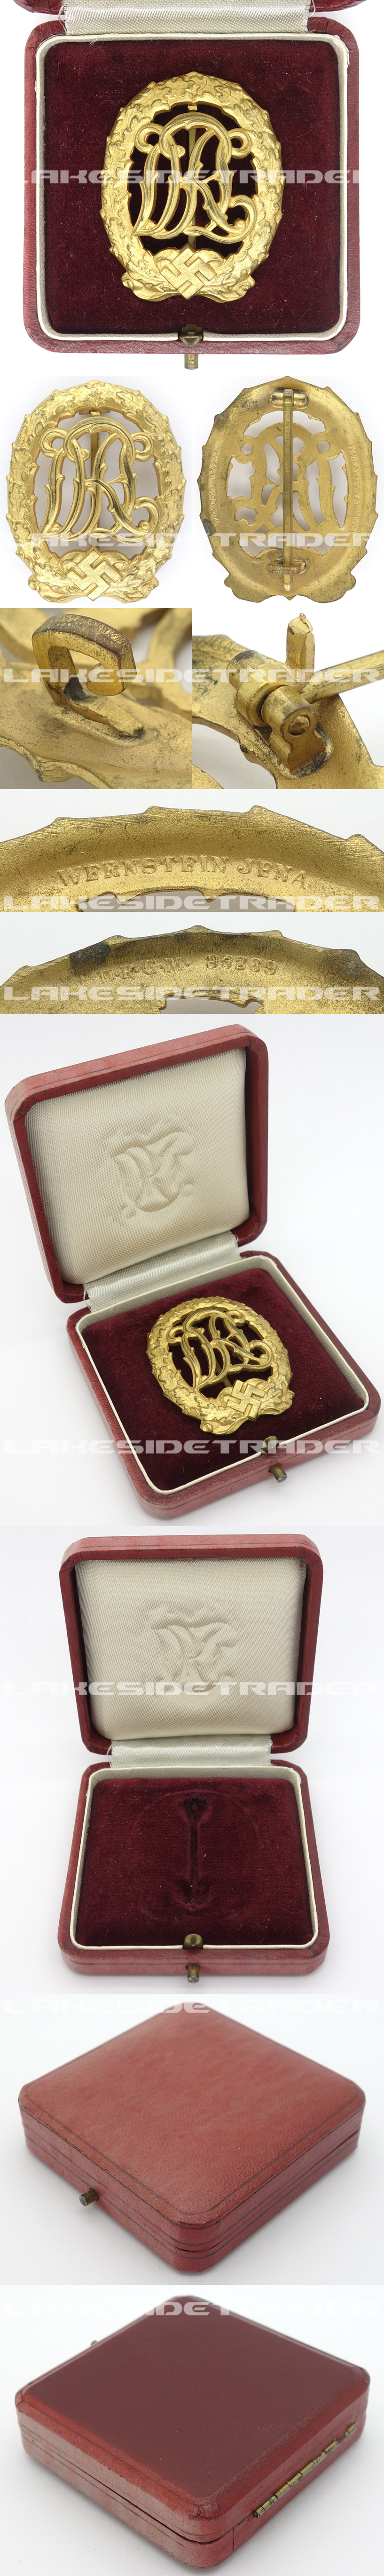 Cased DRL Sports Badge in Gold by W. Jena